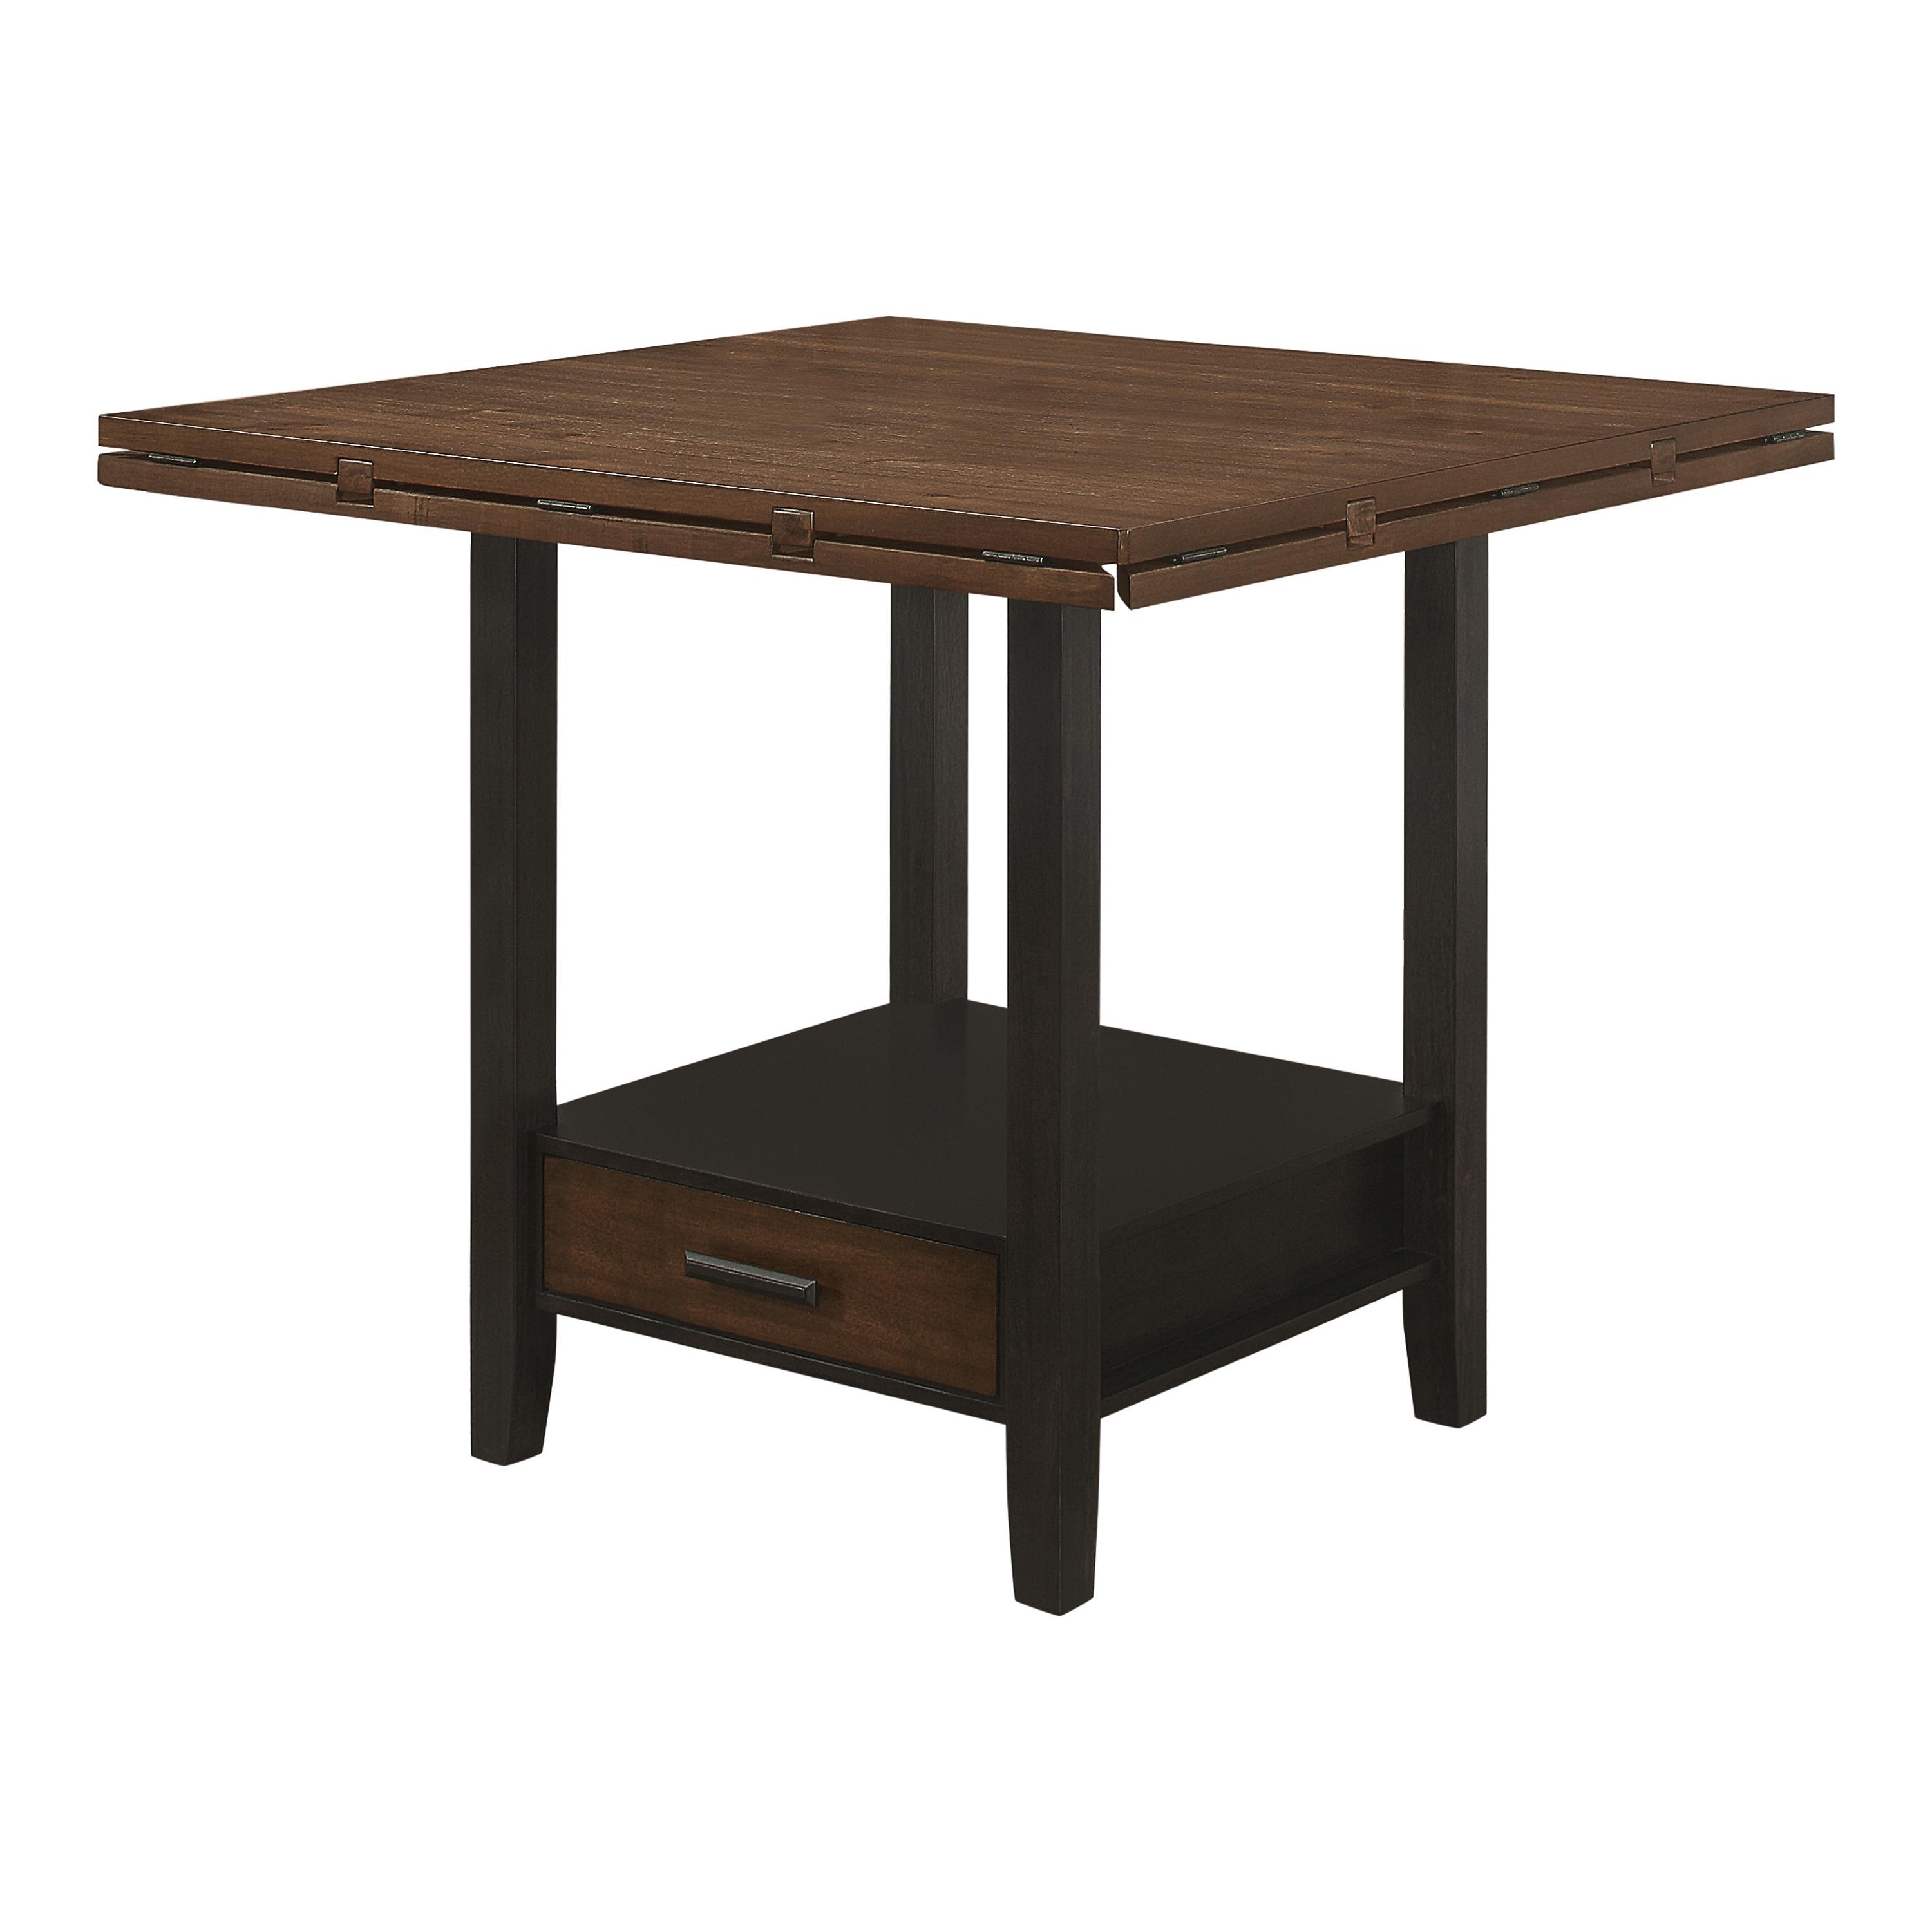 Rustic Counter Height Table 192728 Sanford 192728 in Espresso 